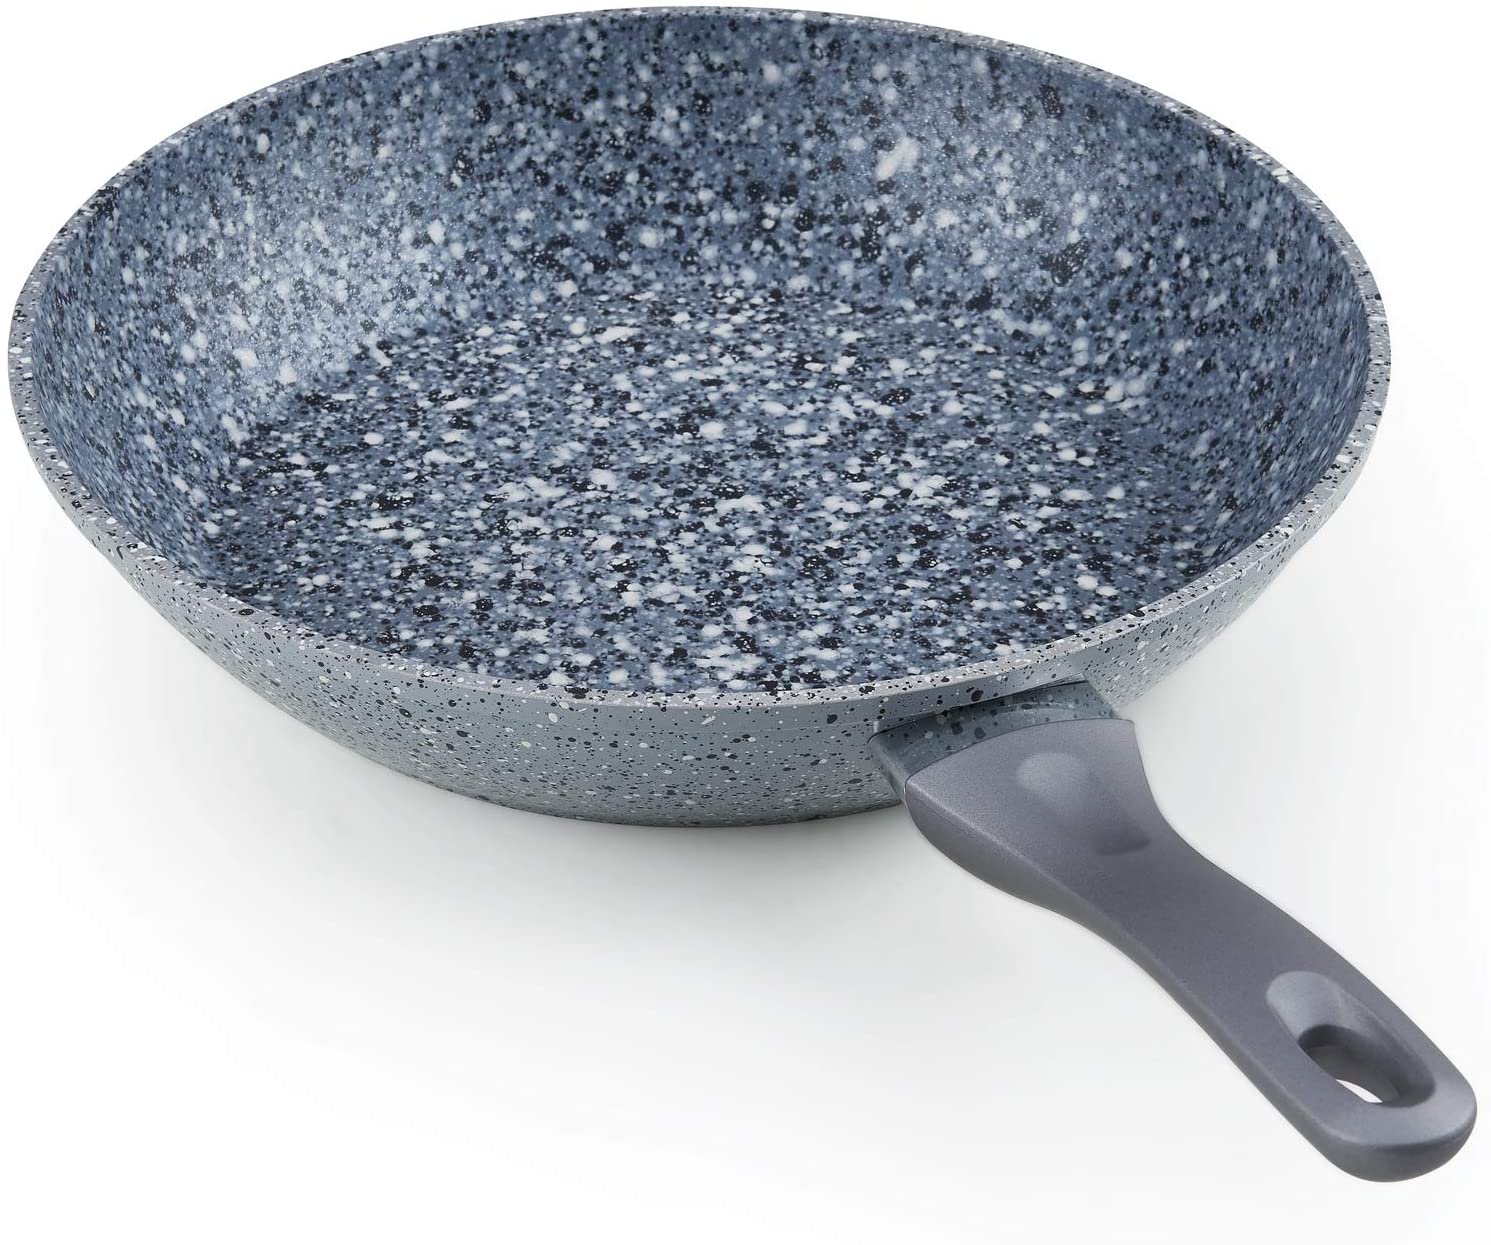 Granitestone Silver 12 Nonstick Fry Pan with Stay Cool Handle